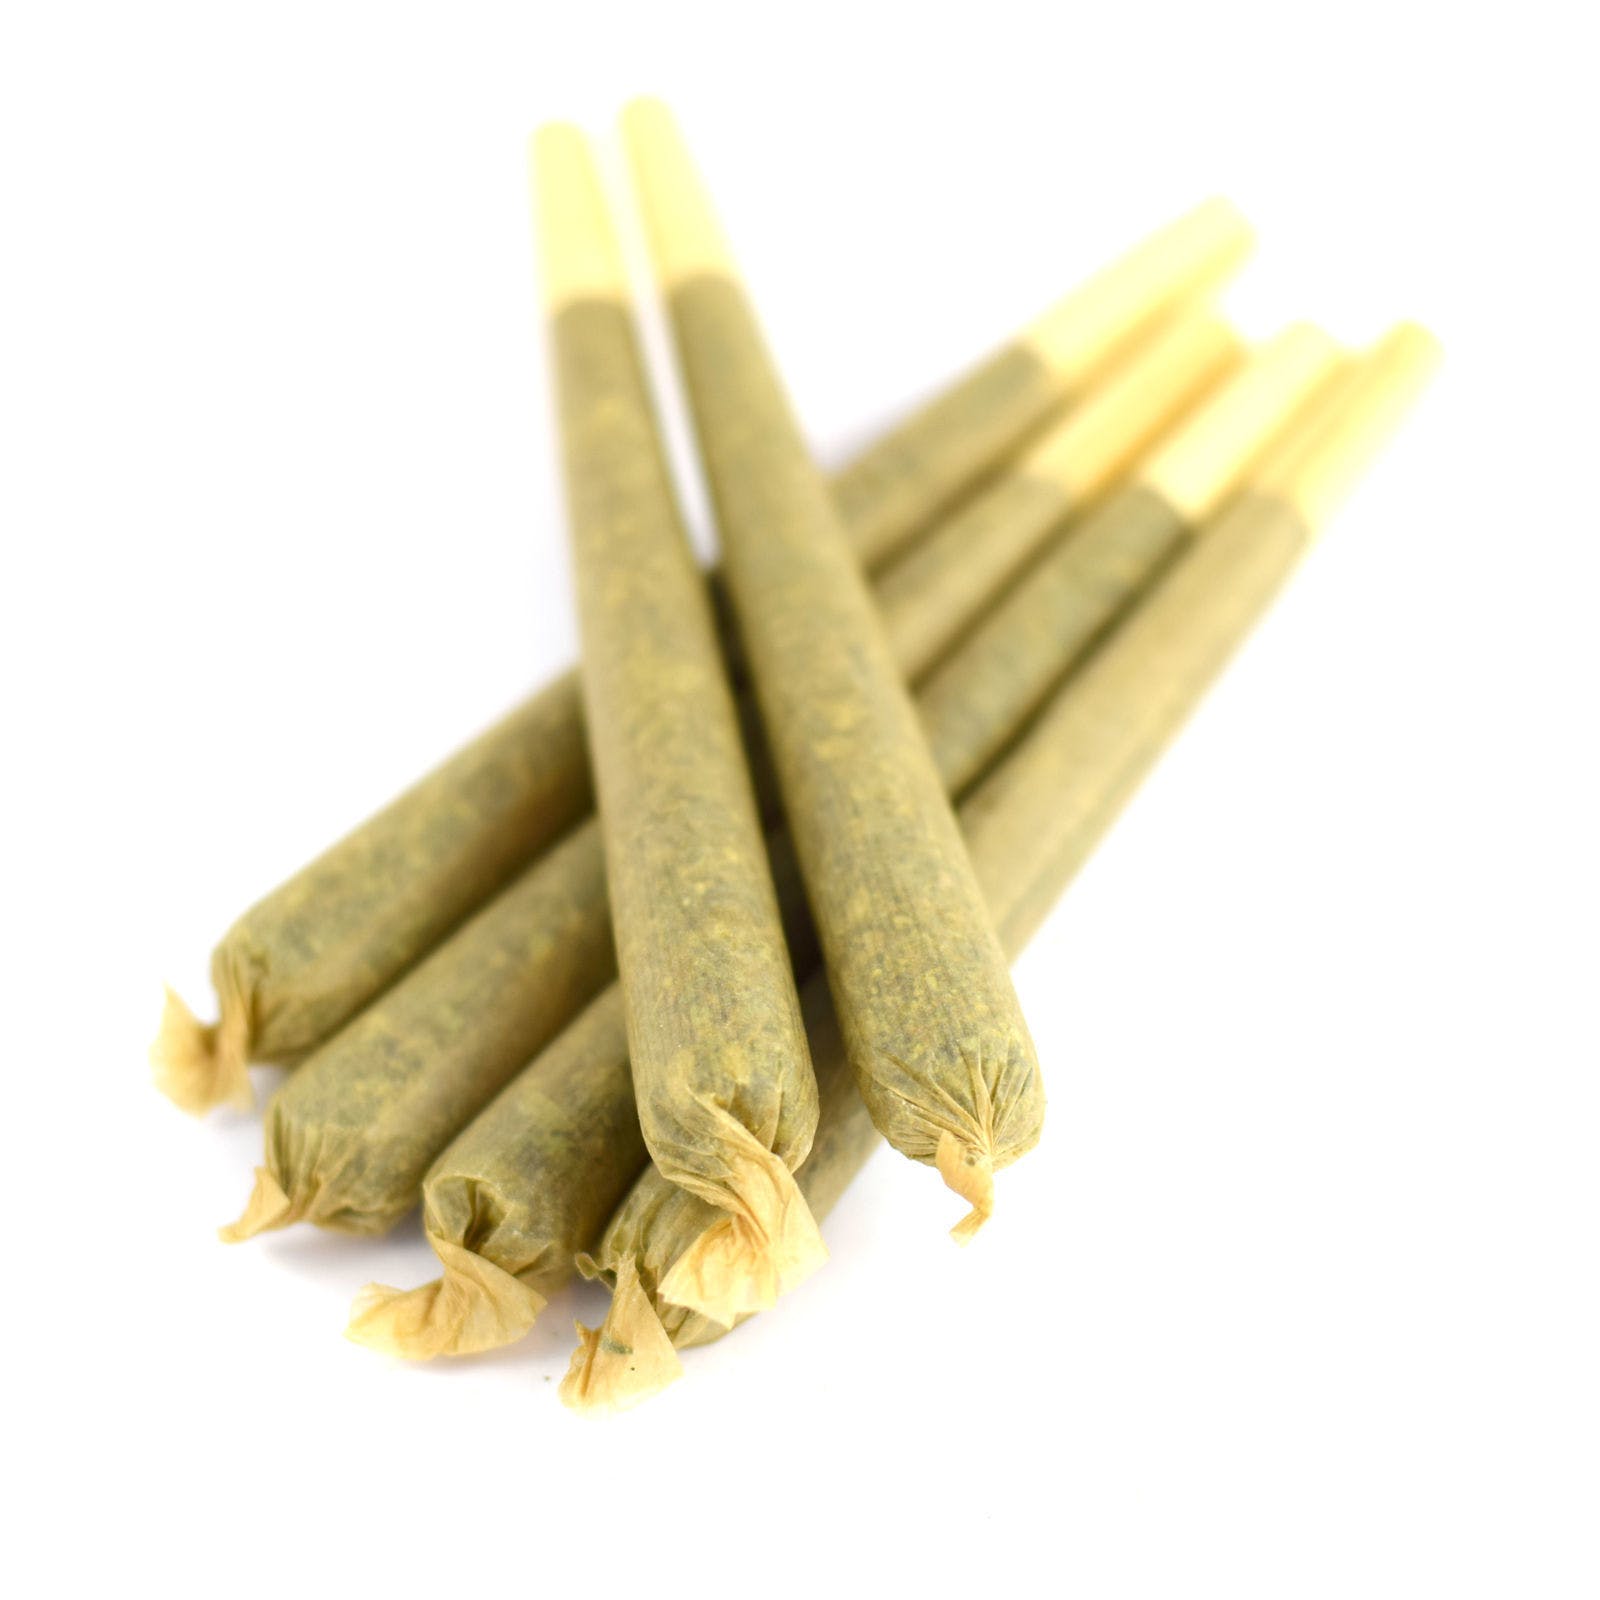 preroll-7bsweetlife-7d-sour-stardawg-preroll